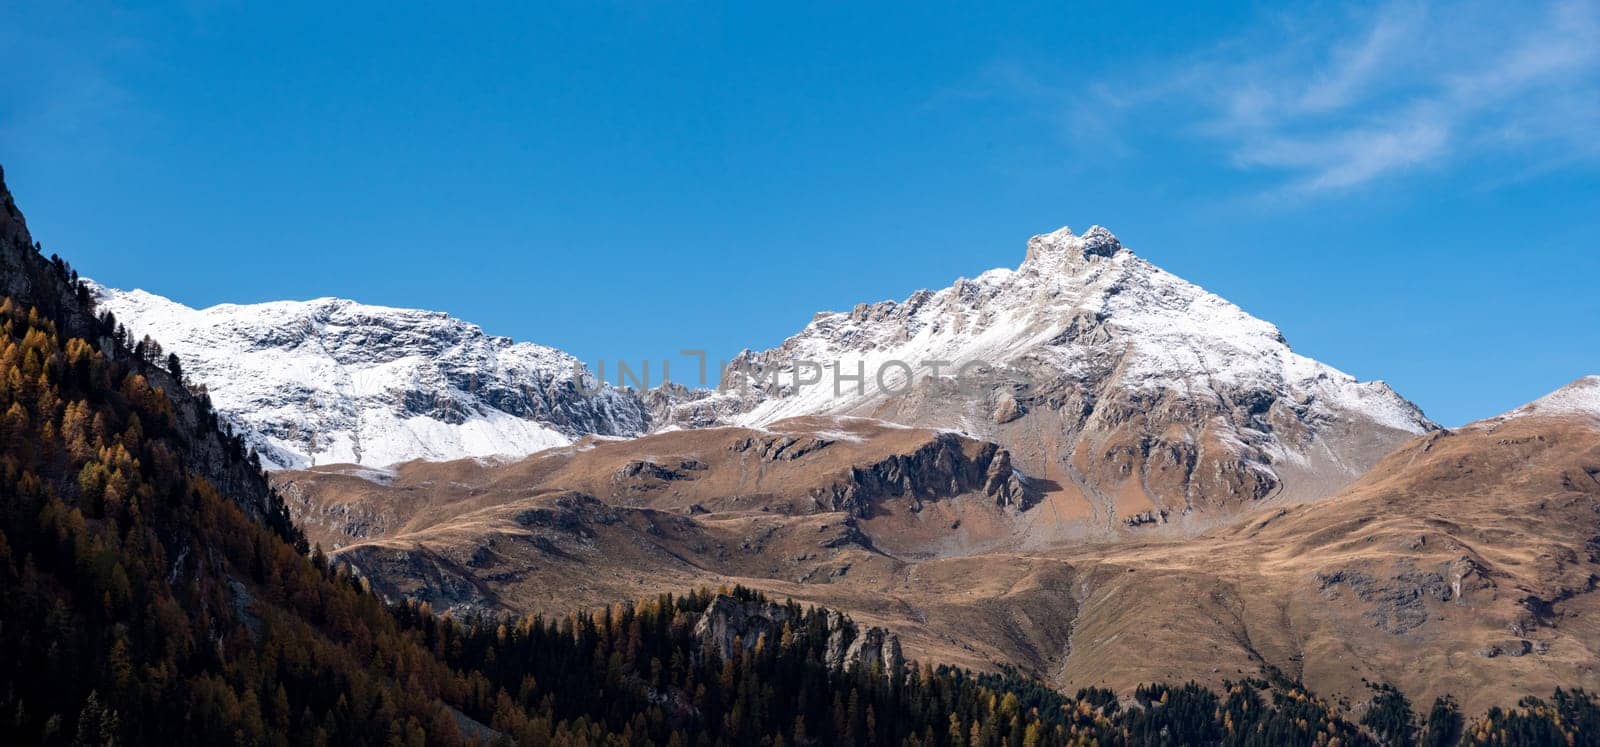 Scenic view of the Arblatsch mountain in the Swiss alps by imagoDens